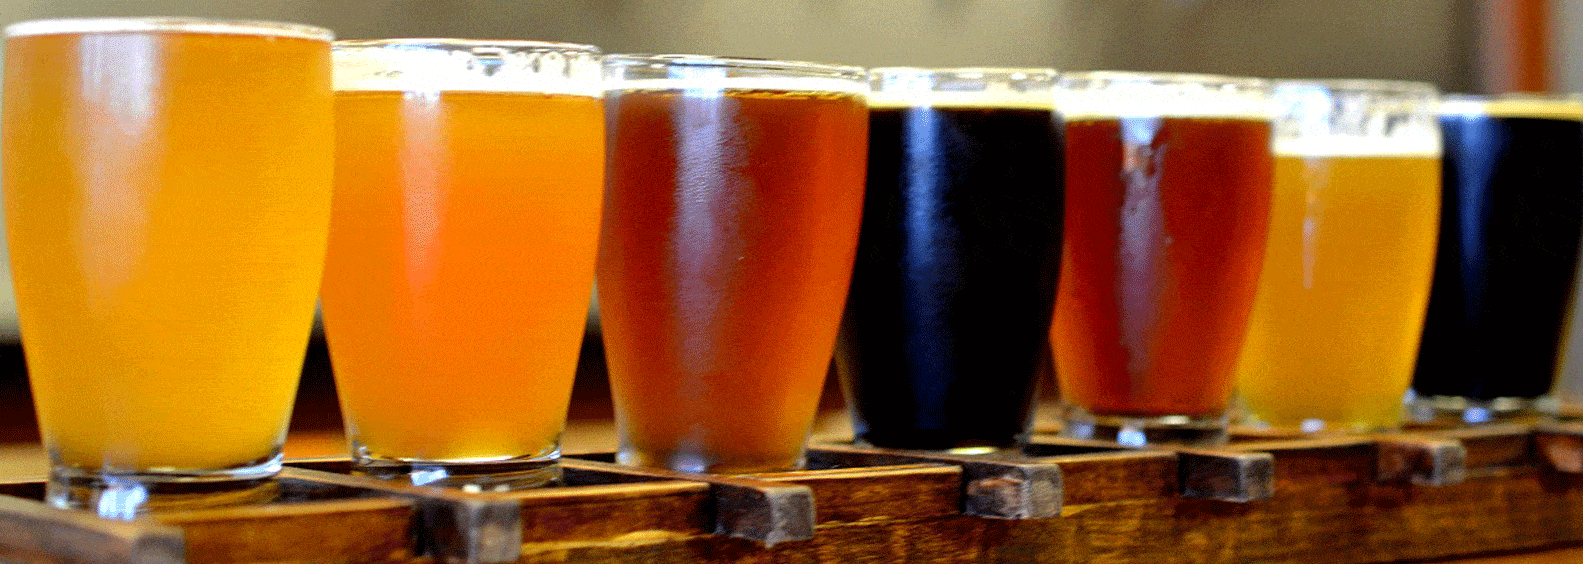 The 10 best craft beer you can enjoy State by State